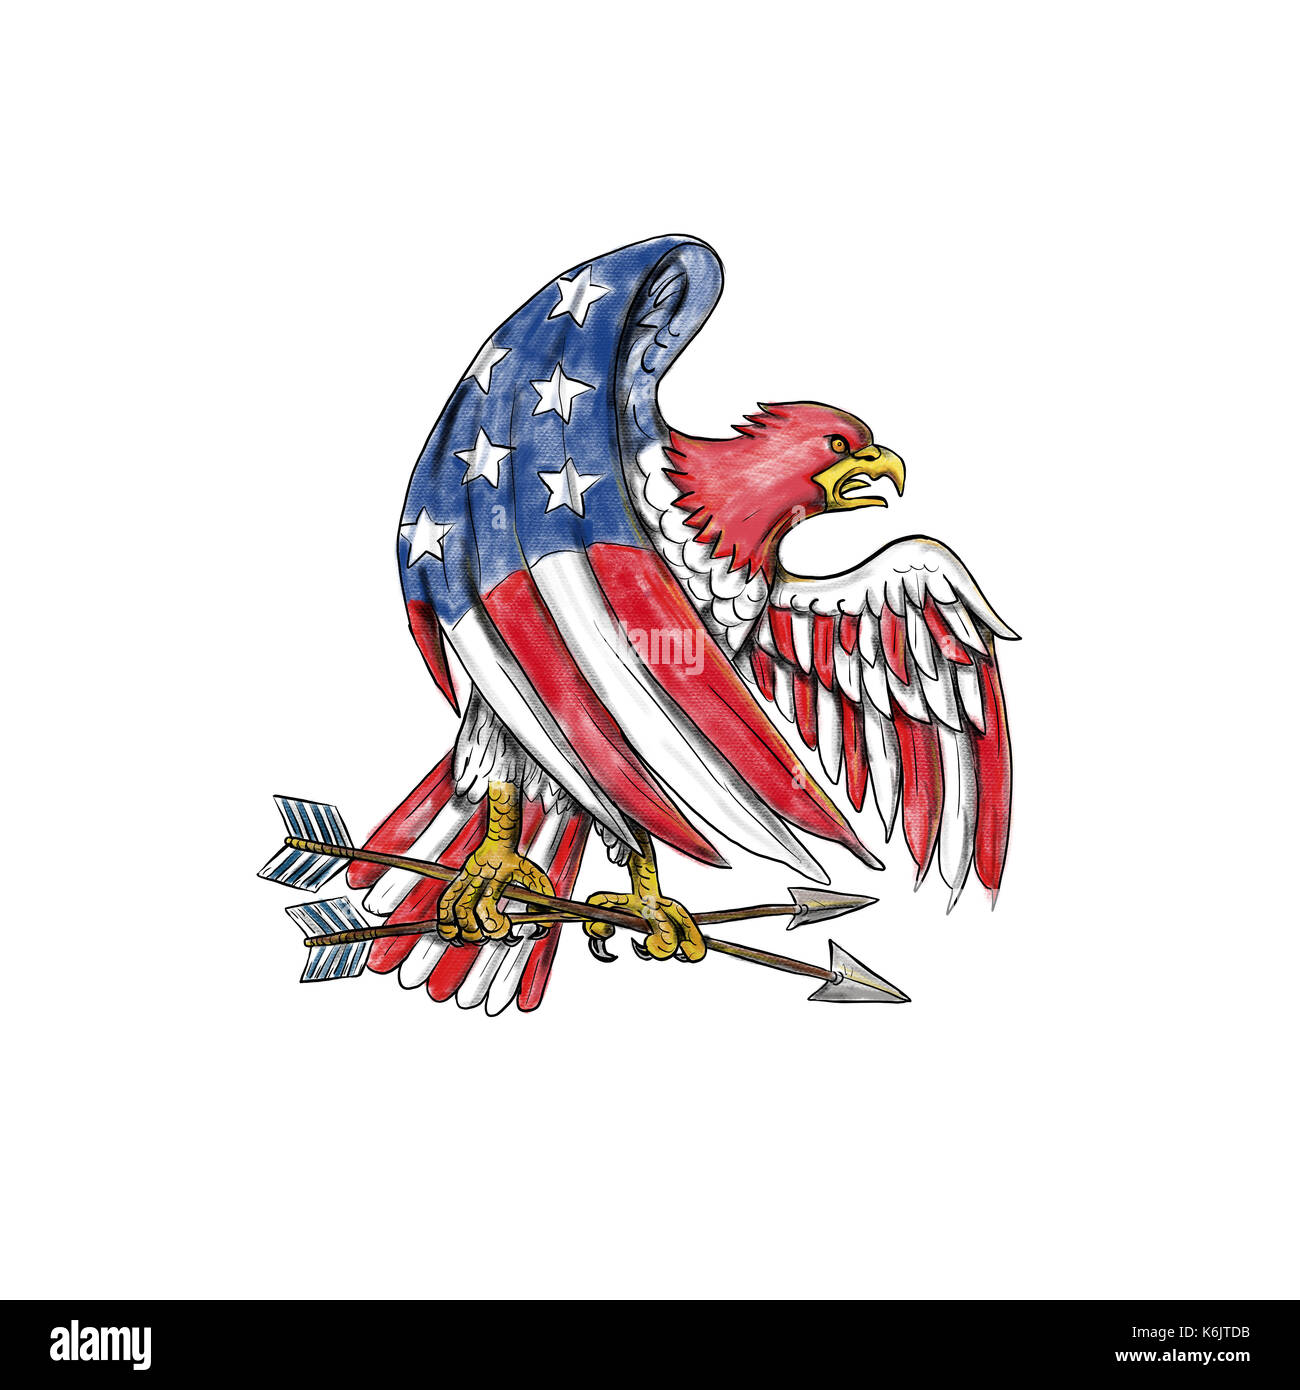 Tattoo style illustration of an American Bald Eagle with USA stars and stripes flag on body and wing clutching arrow on isolated background. Stock Photo